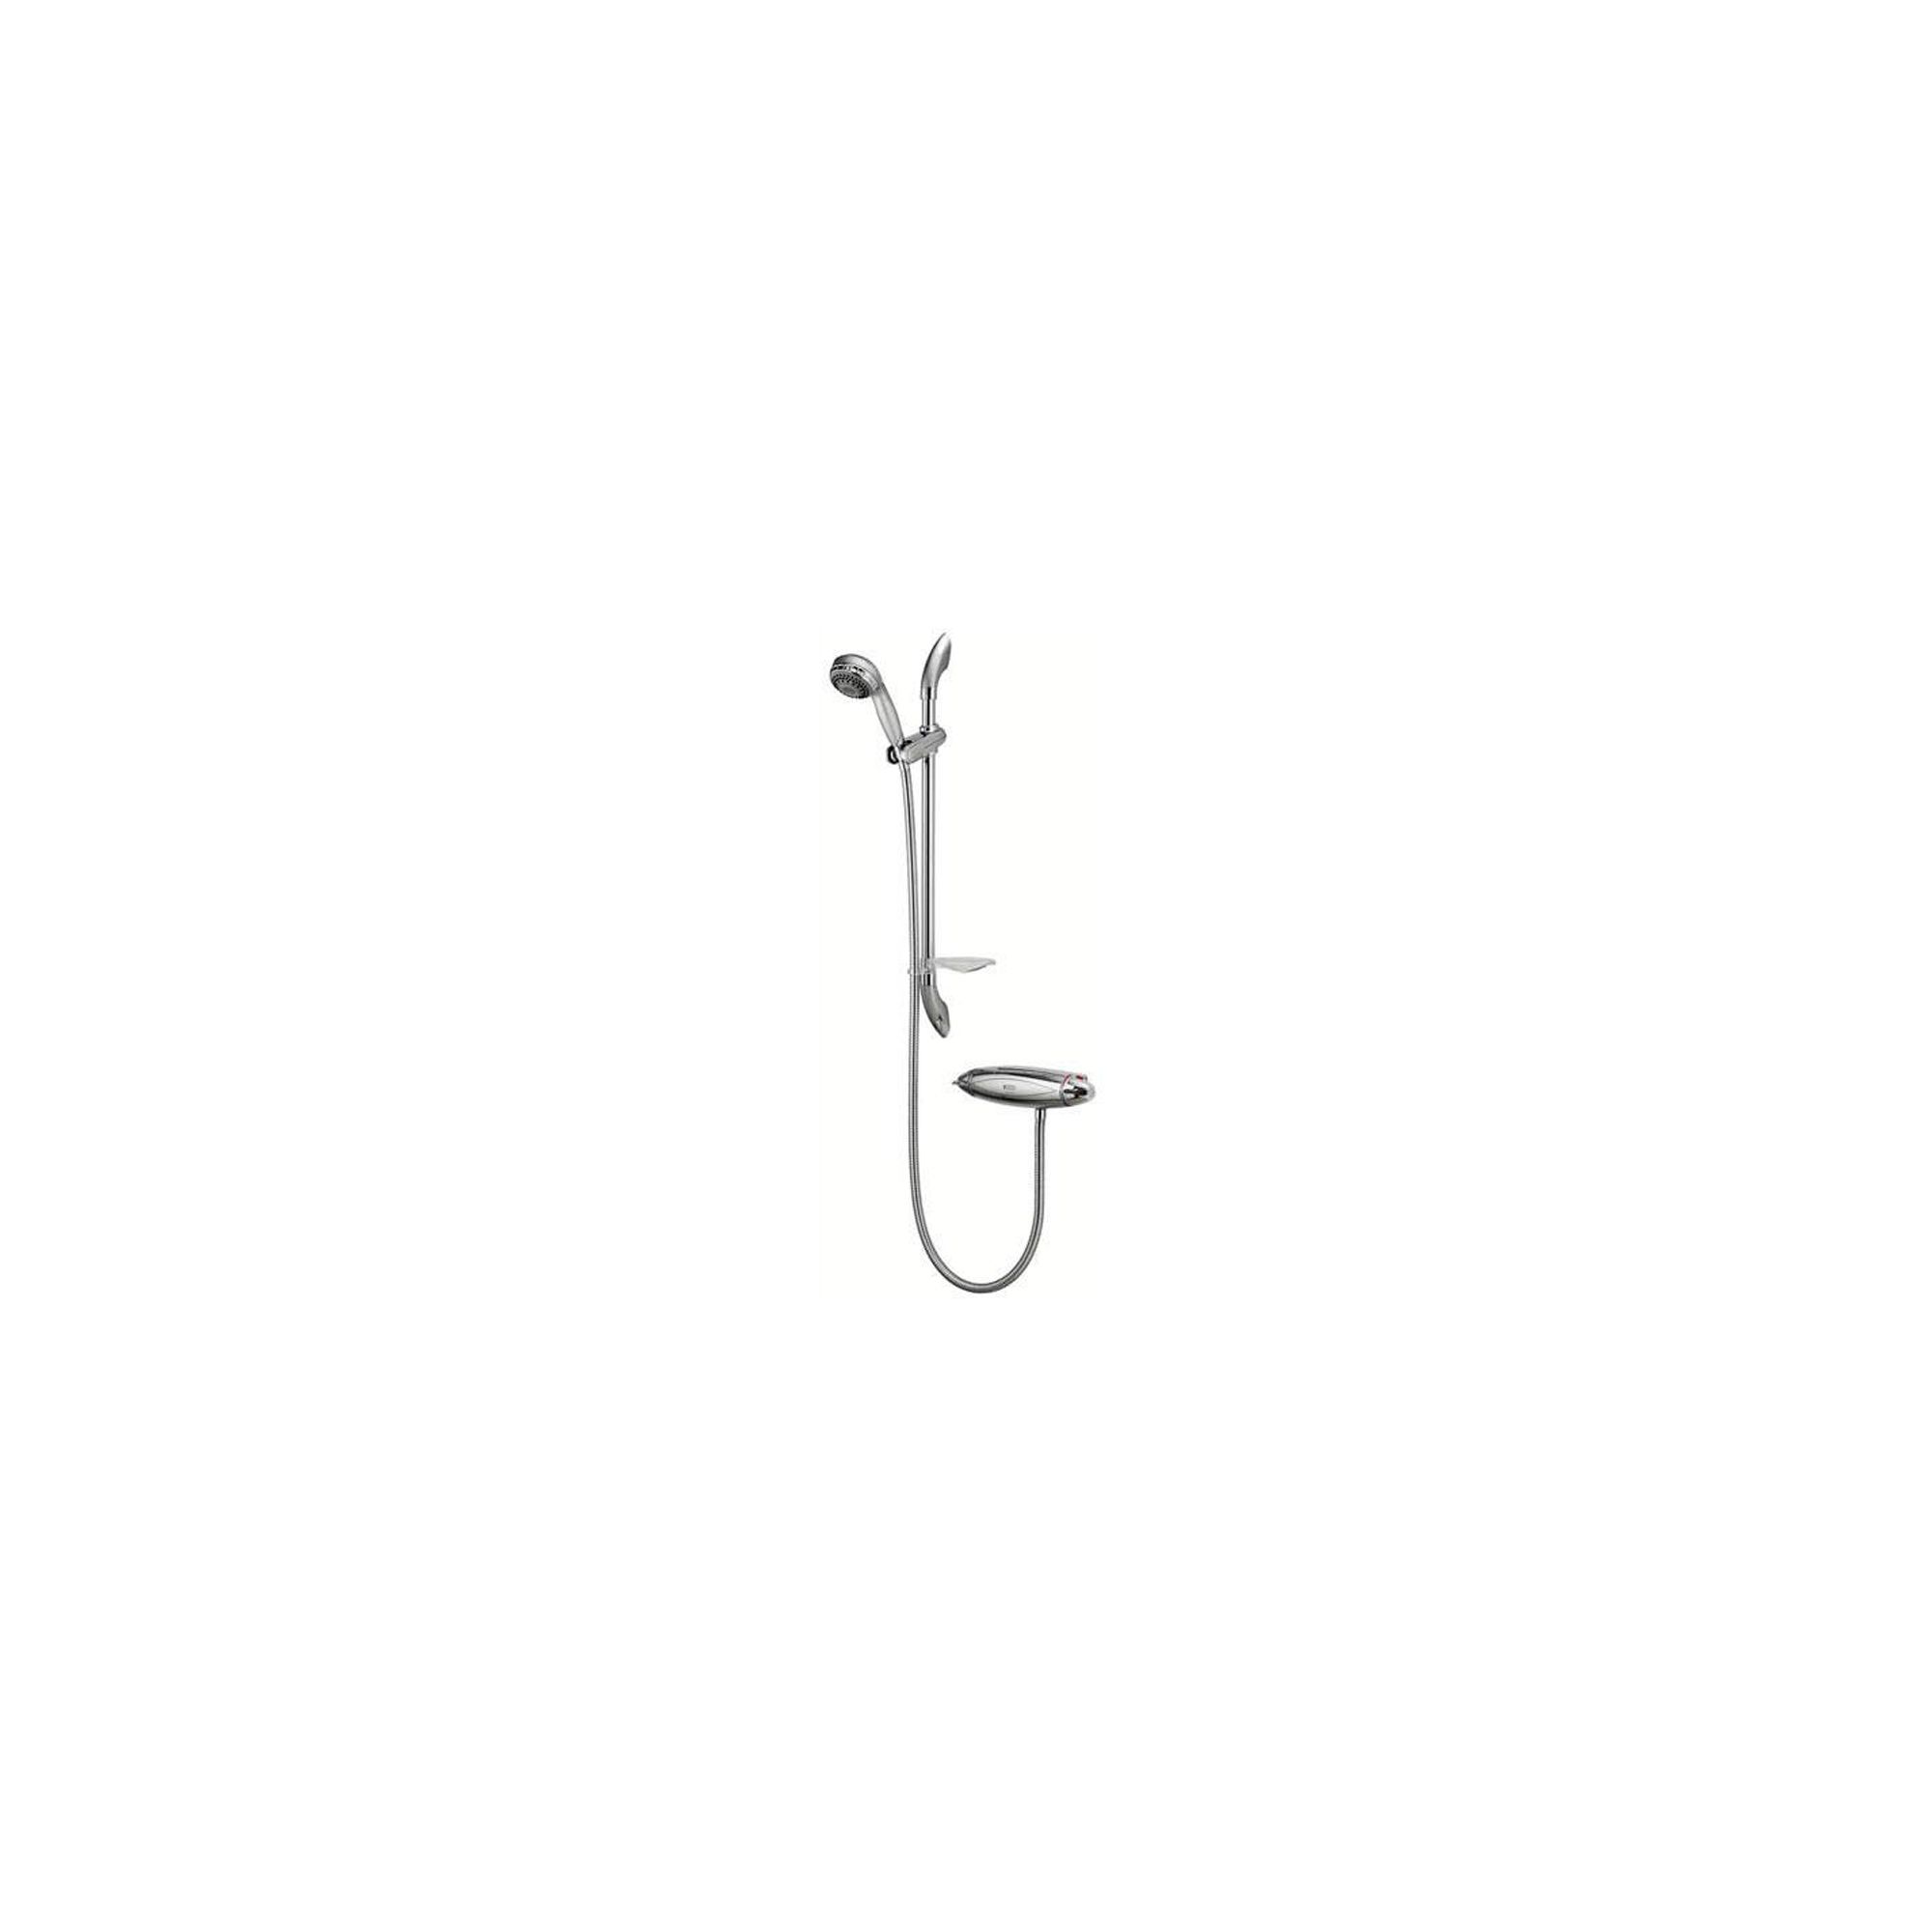 Aqualisa Aquarian Thermo Exposed Shower Valve with Adjustable Shower Head Chrome at Tesco Direct